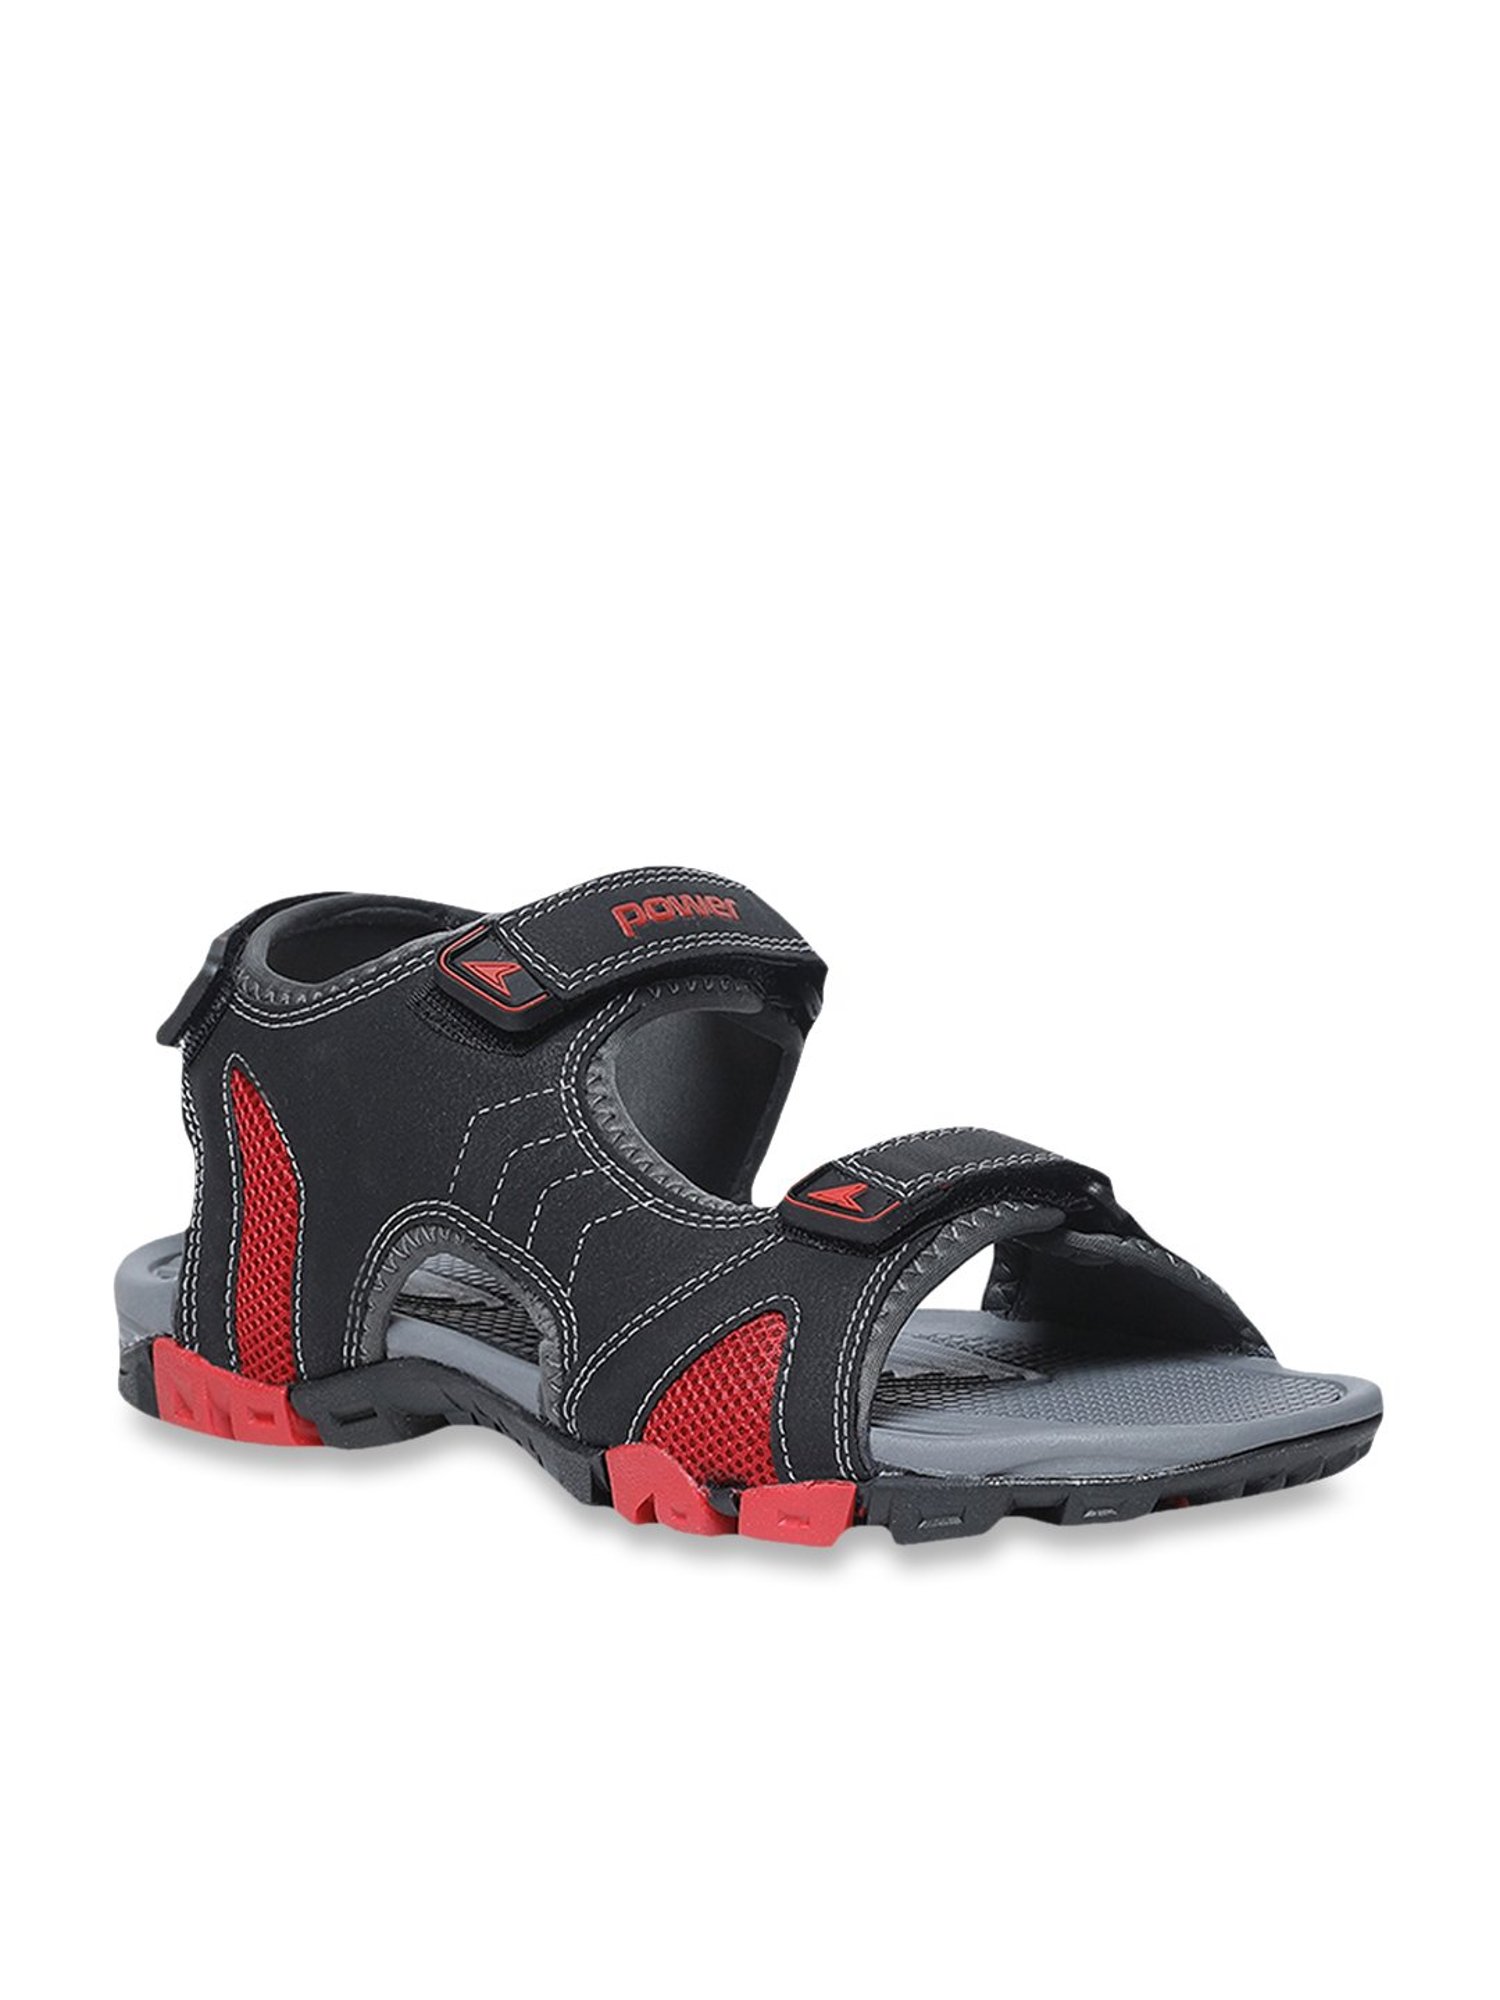 Bata Foot Thrill Men's 861-6179-42 Black Sports Sandals & Floaters (8 UK) :  Amazon.in: Fashion